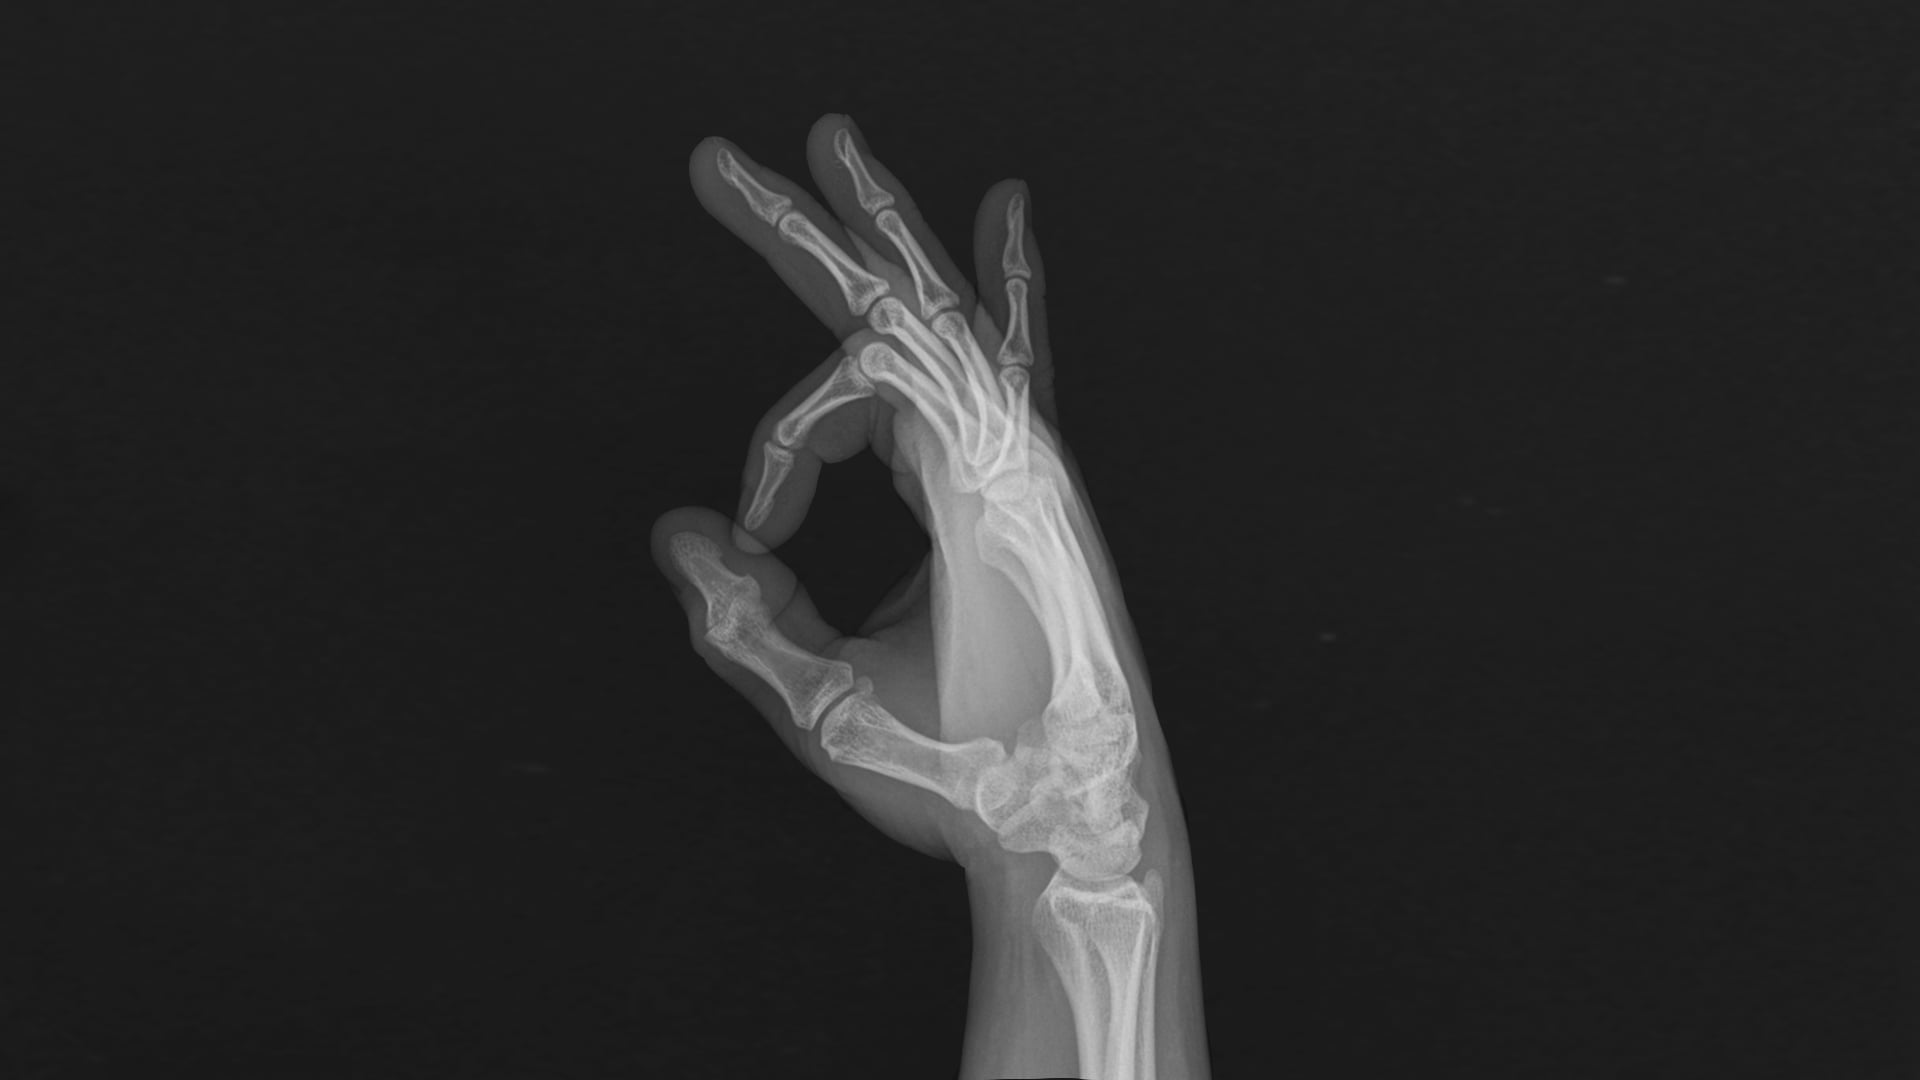 hand x-ray result, hands, bones, x-rays, fingers